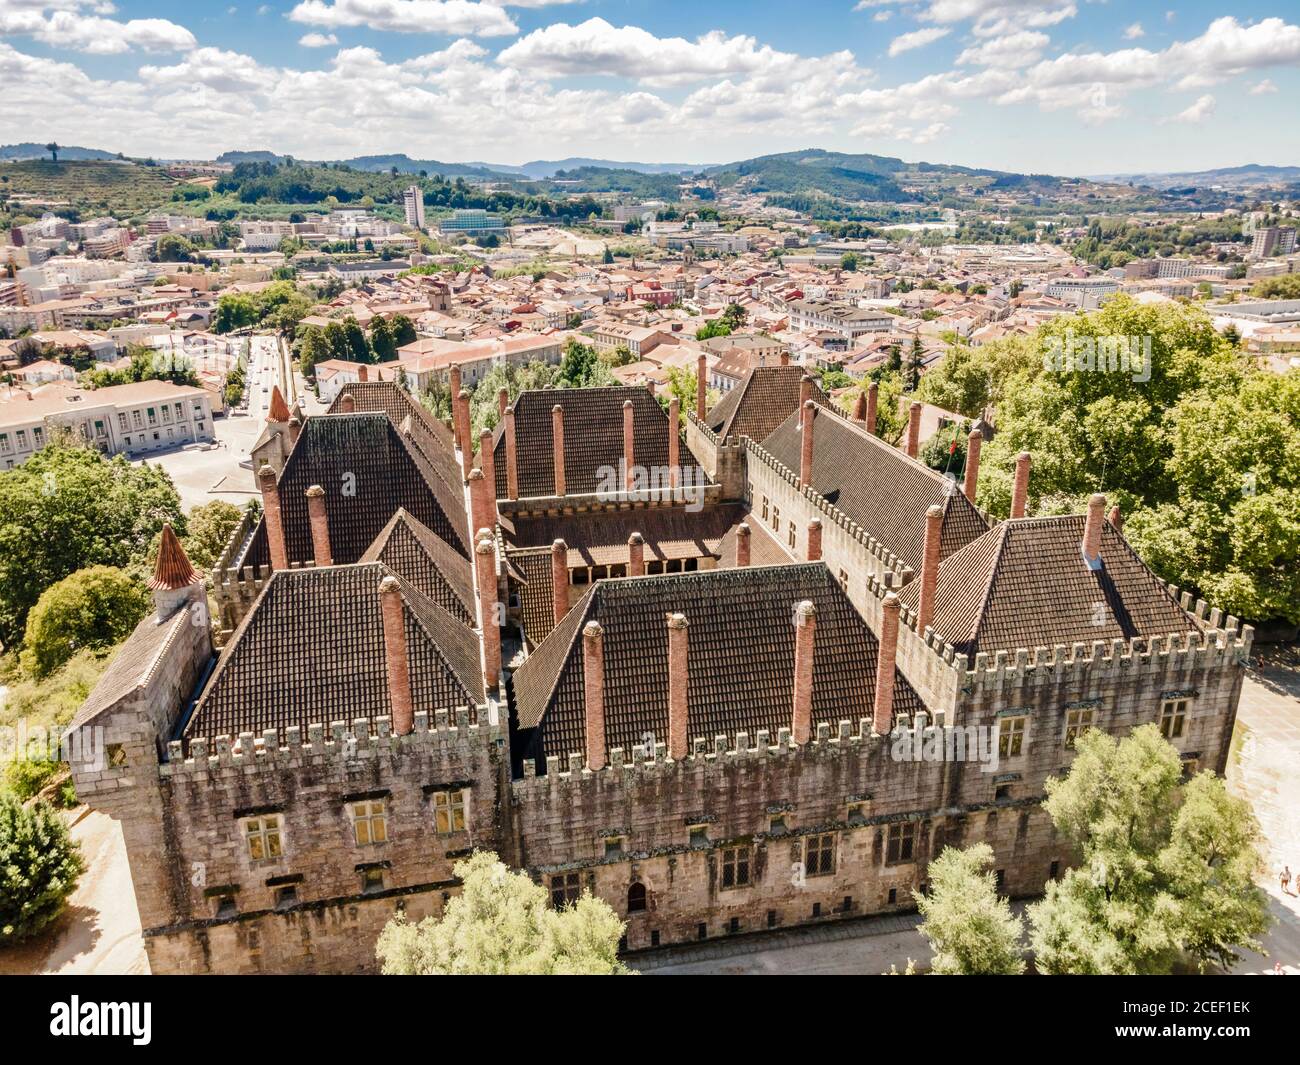 Aerial view of palace of dukes of Braganza and city of Guimaraes, Portugal Stock Photo